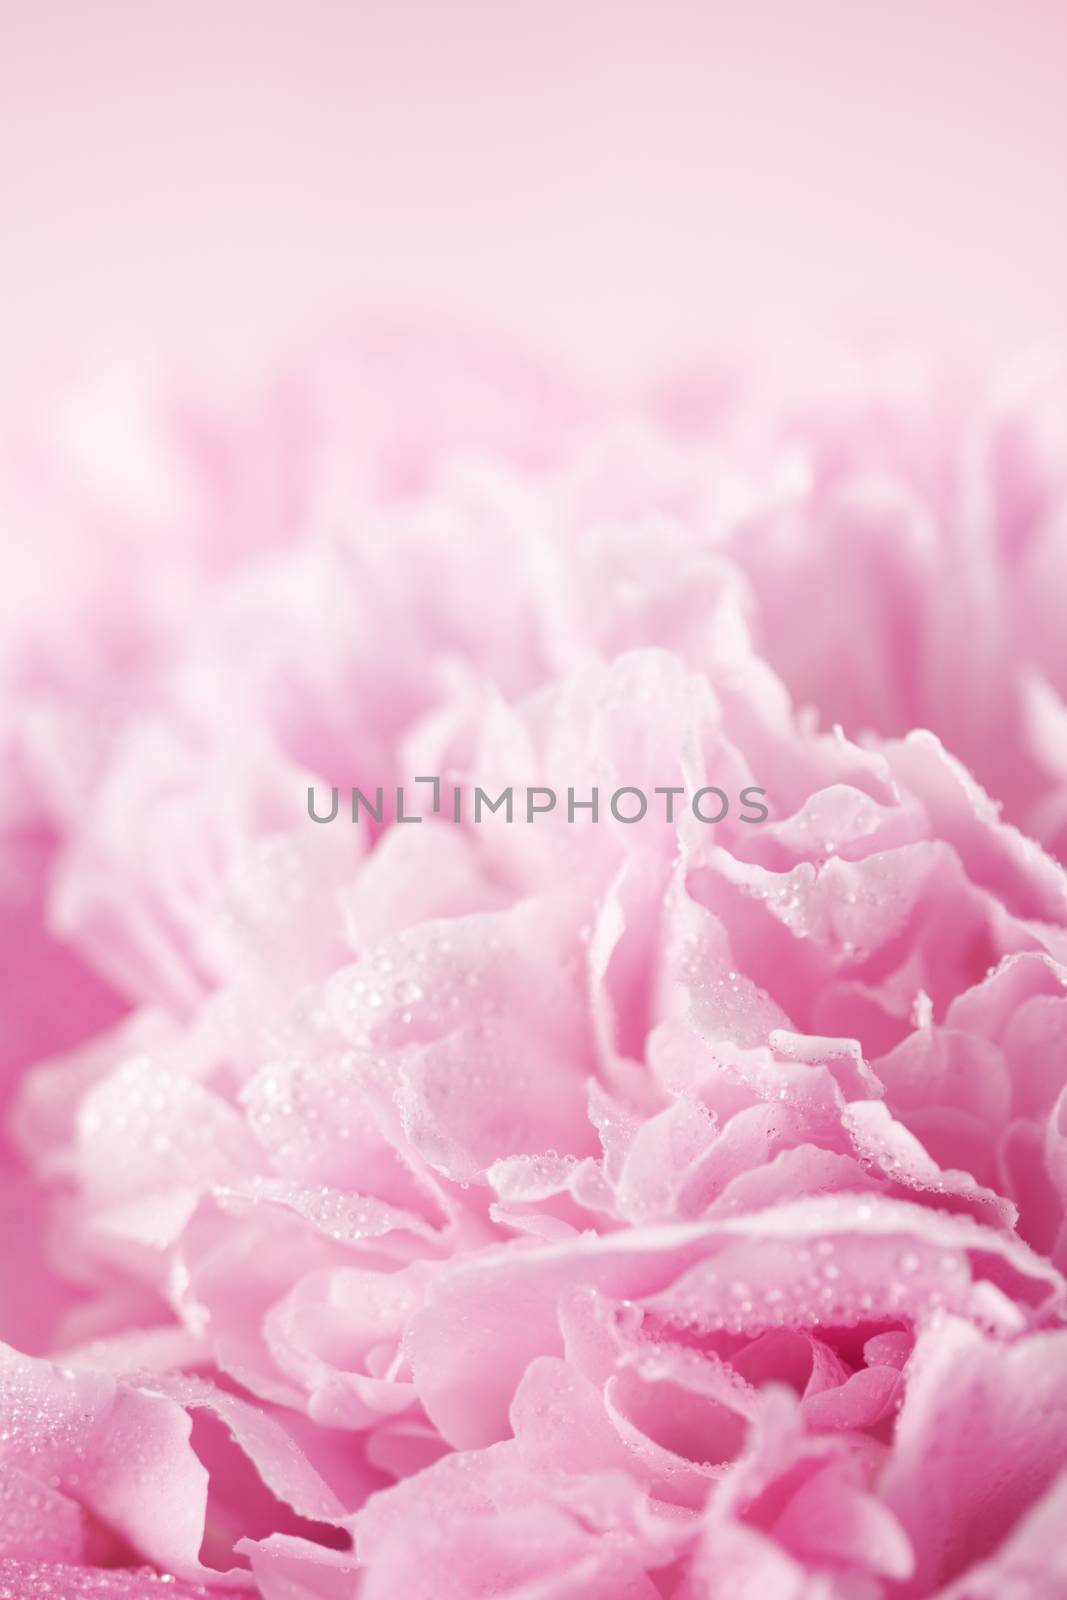 Abstract pink peony flower background